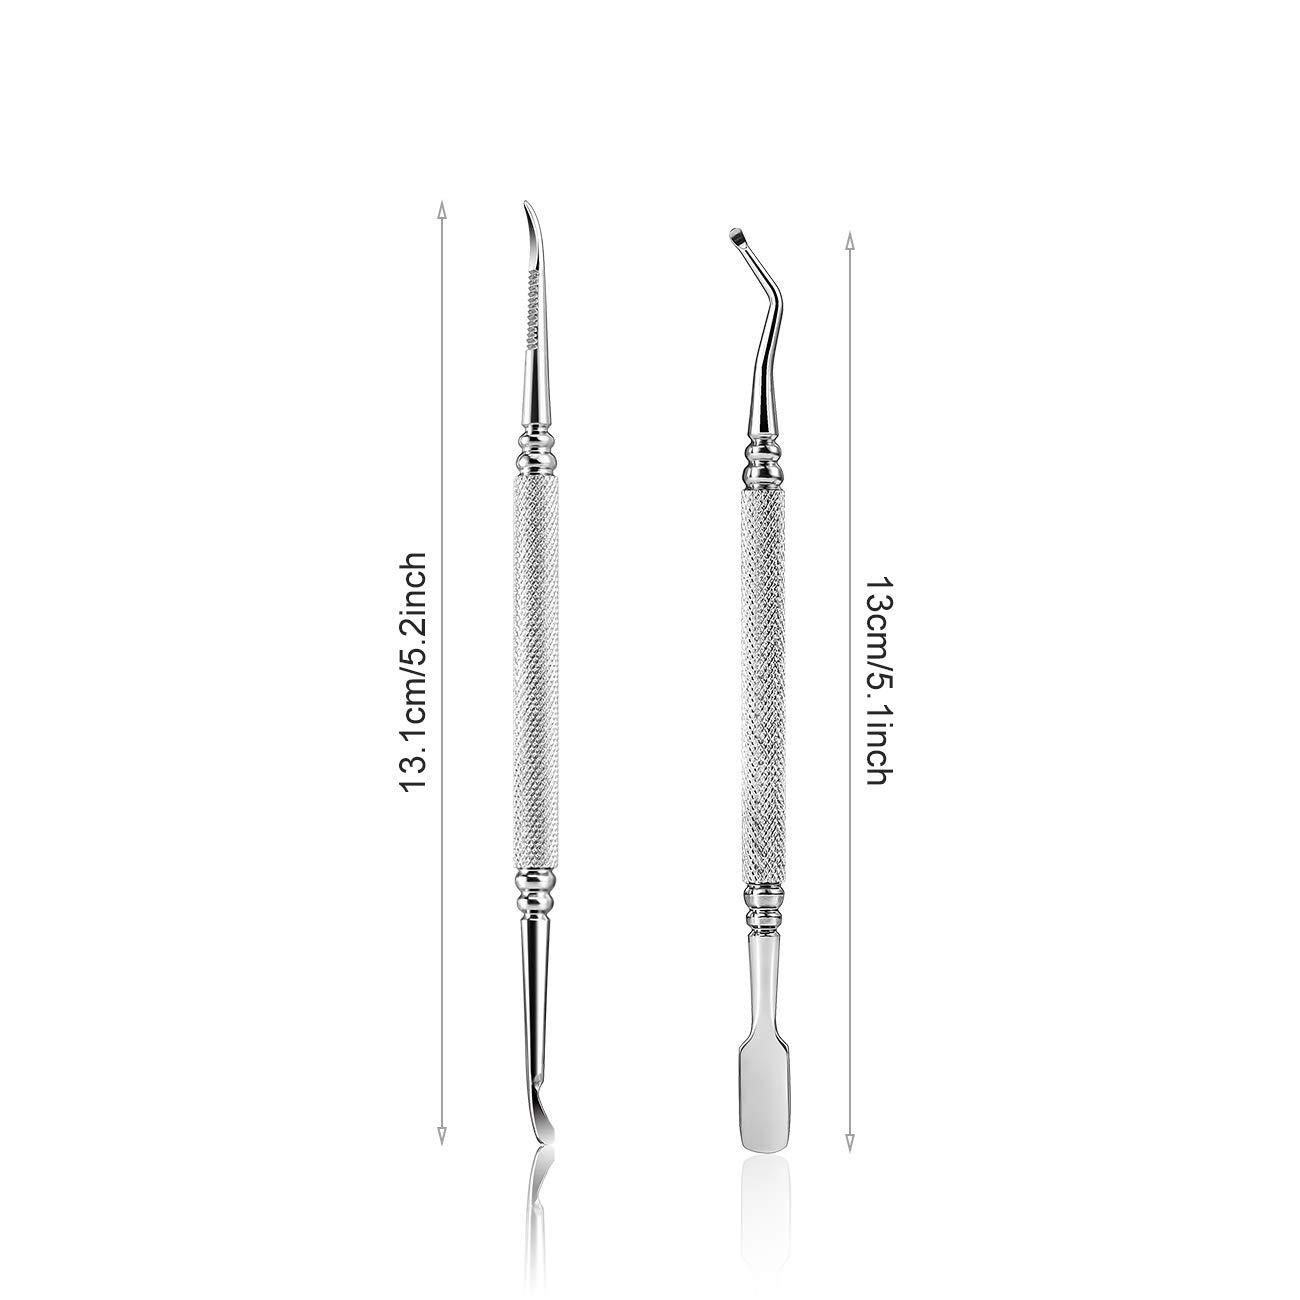 VGE BON Metal Cuticle Pusher and Nail Cleaner Set - Complete with Nail  Files, 100 Disposable Bands, and Precision Tip for Natural Nail Preparation  and